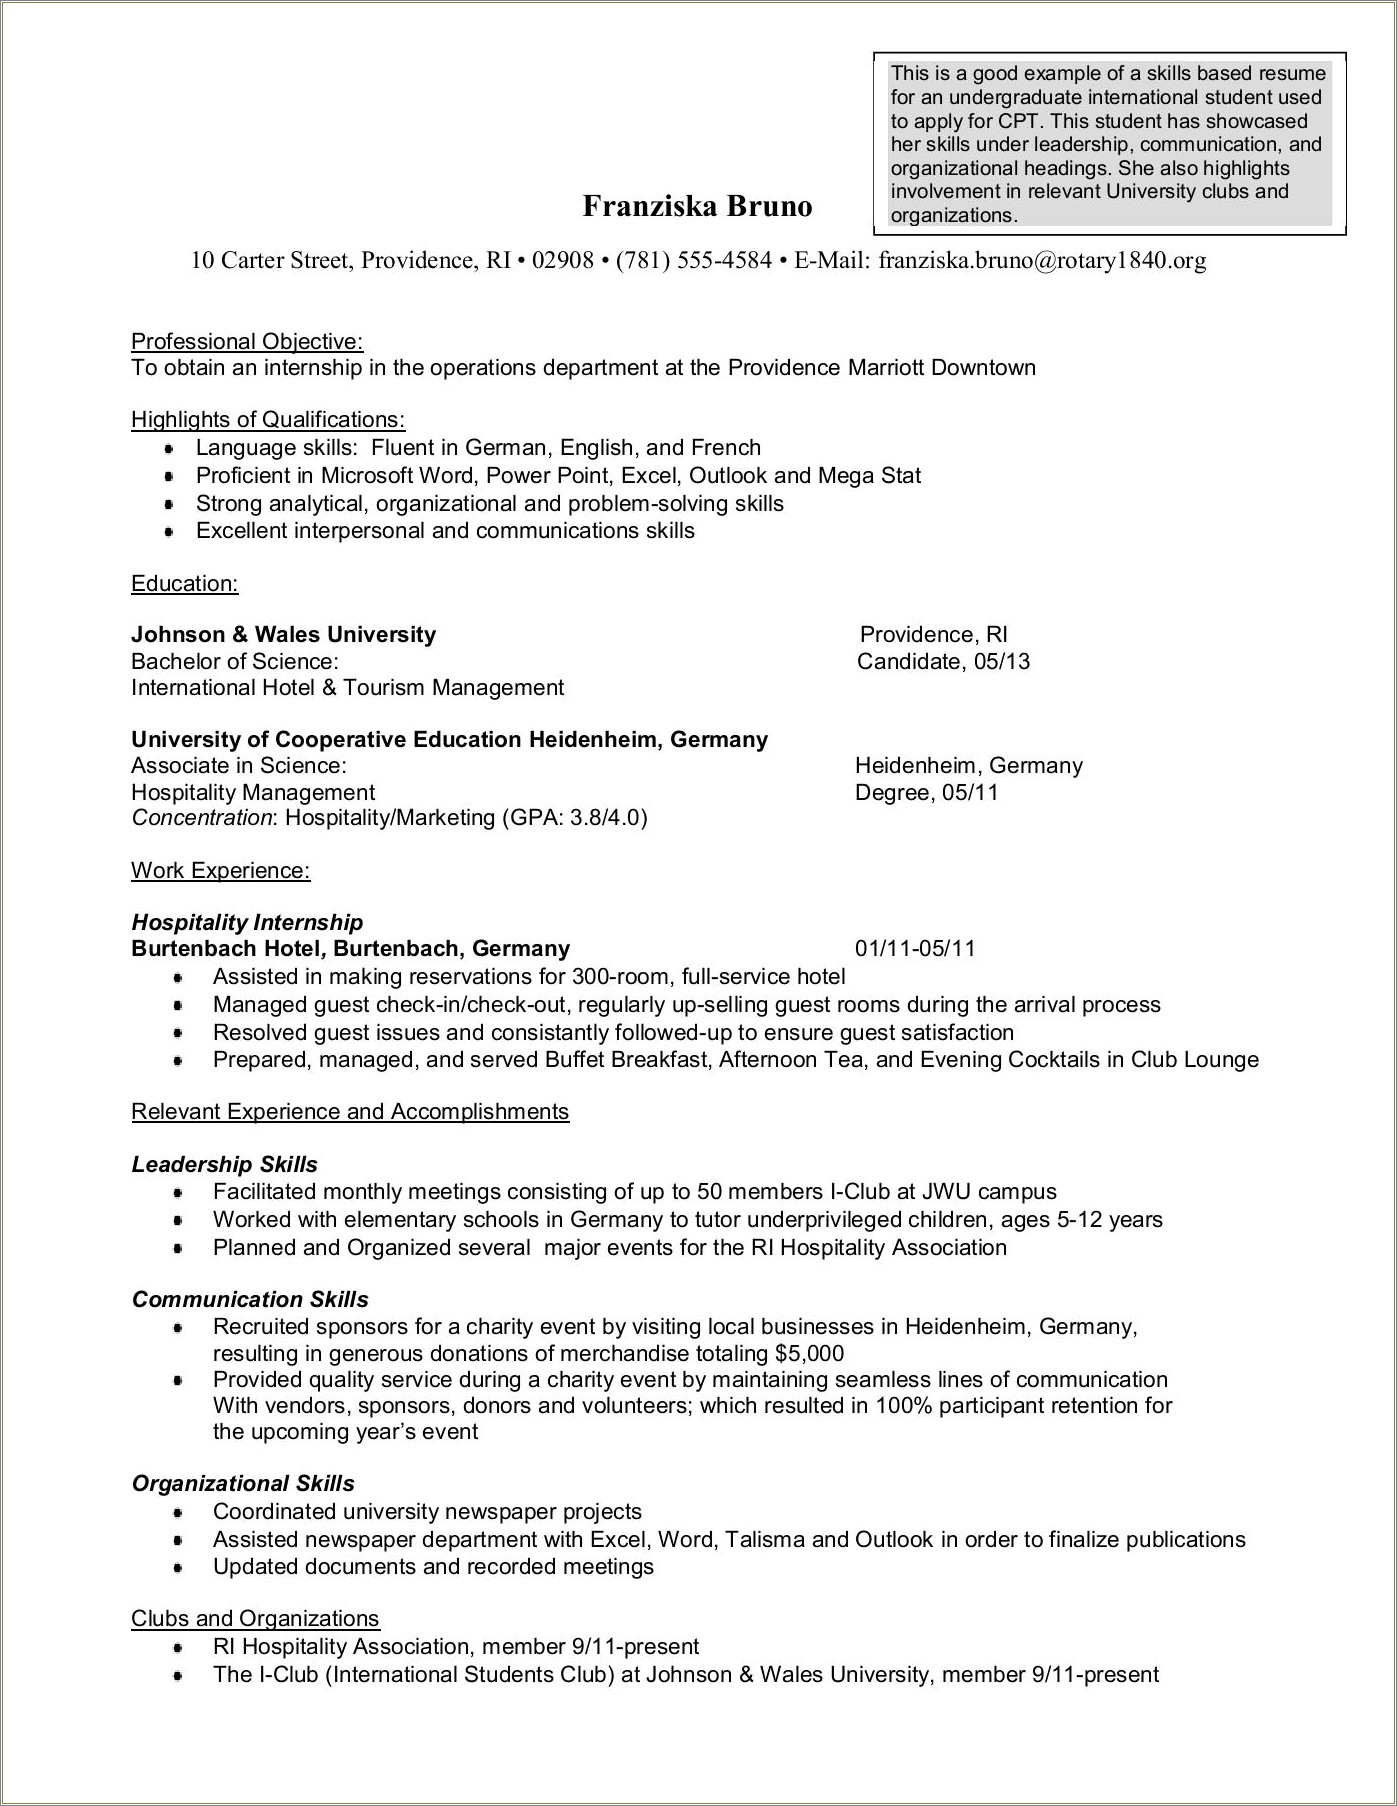 Resumes With National And International Experiences Included